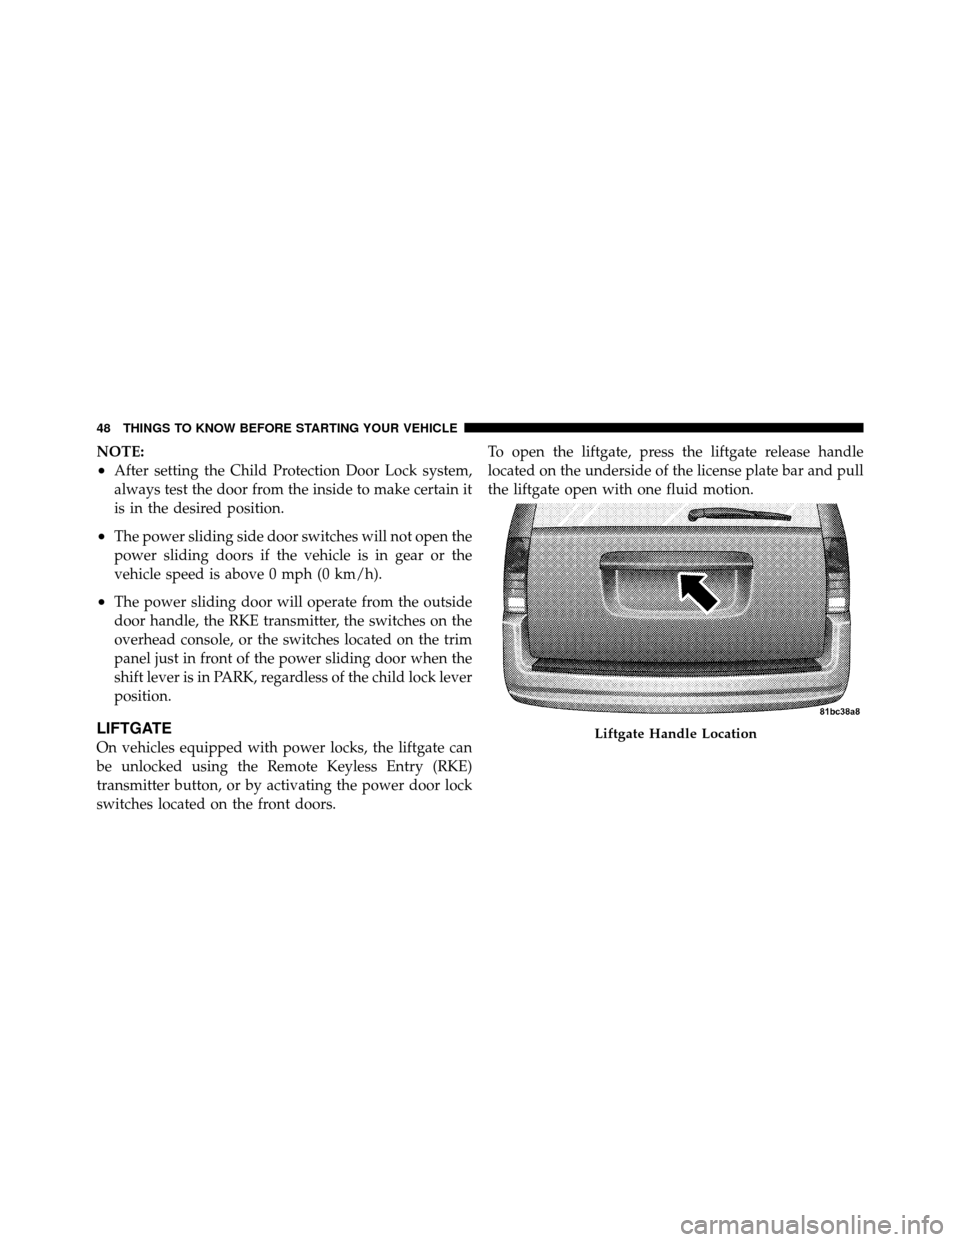 CHRYSLER TOWN AND COUNTRY 2010 5.G Service Manual NOTE:
•After setting the Child Protection Door Lock system,
always test the door from the inside to make certain it
is in the desired position.
•The power sliding side door switches will not open 